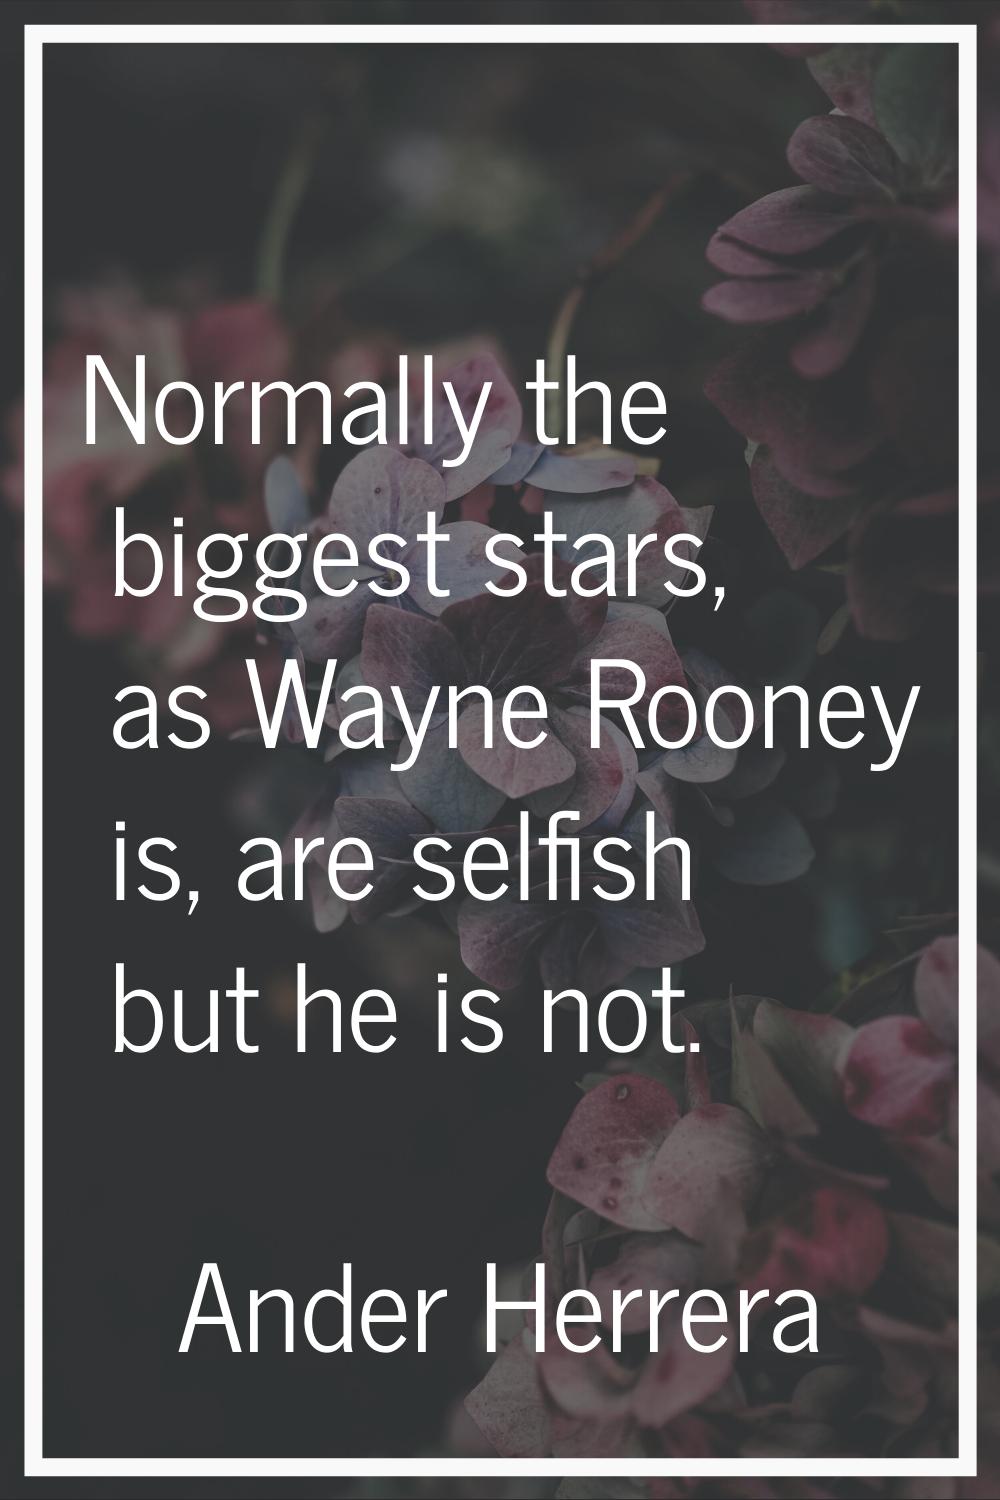 Normally the biggest stars, as Wayne Rooney is, are selfish but he is not.